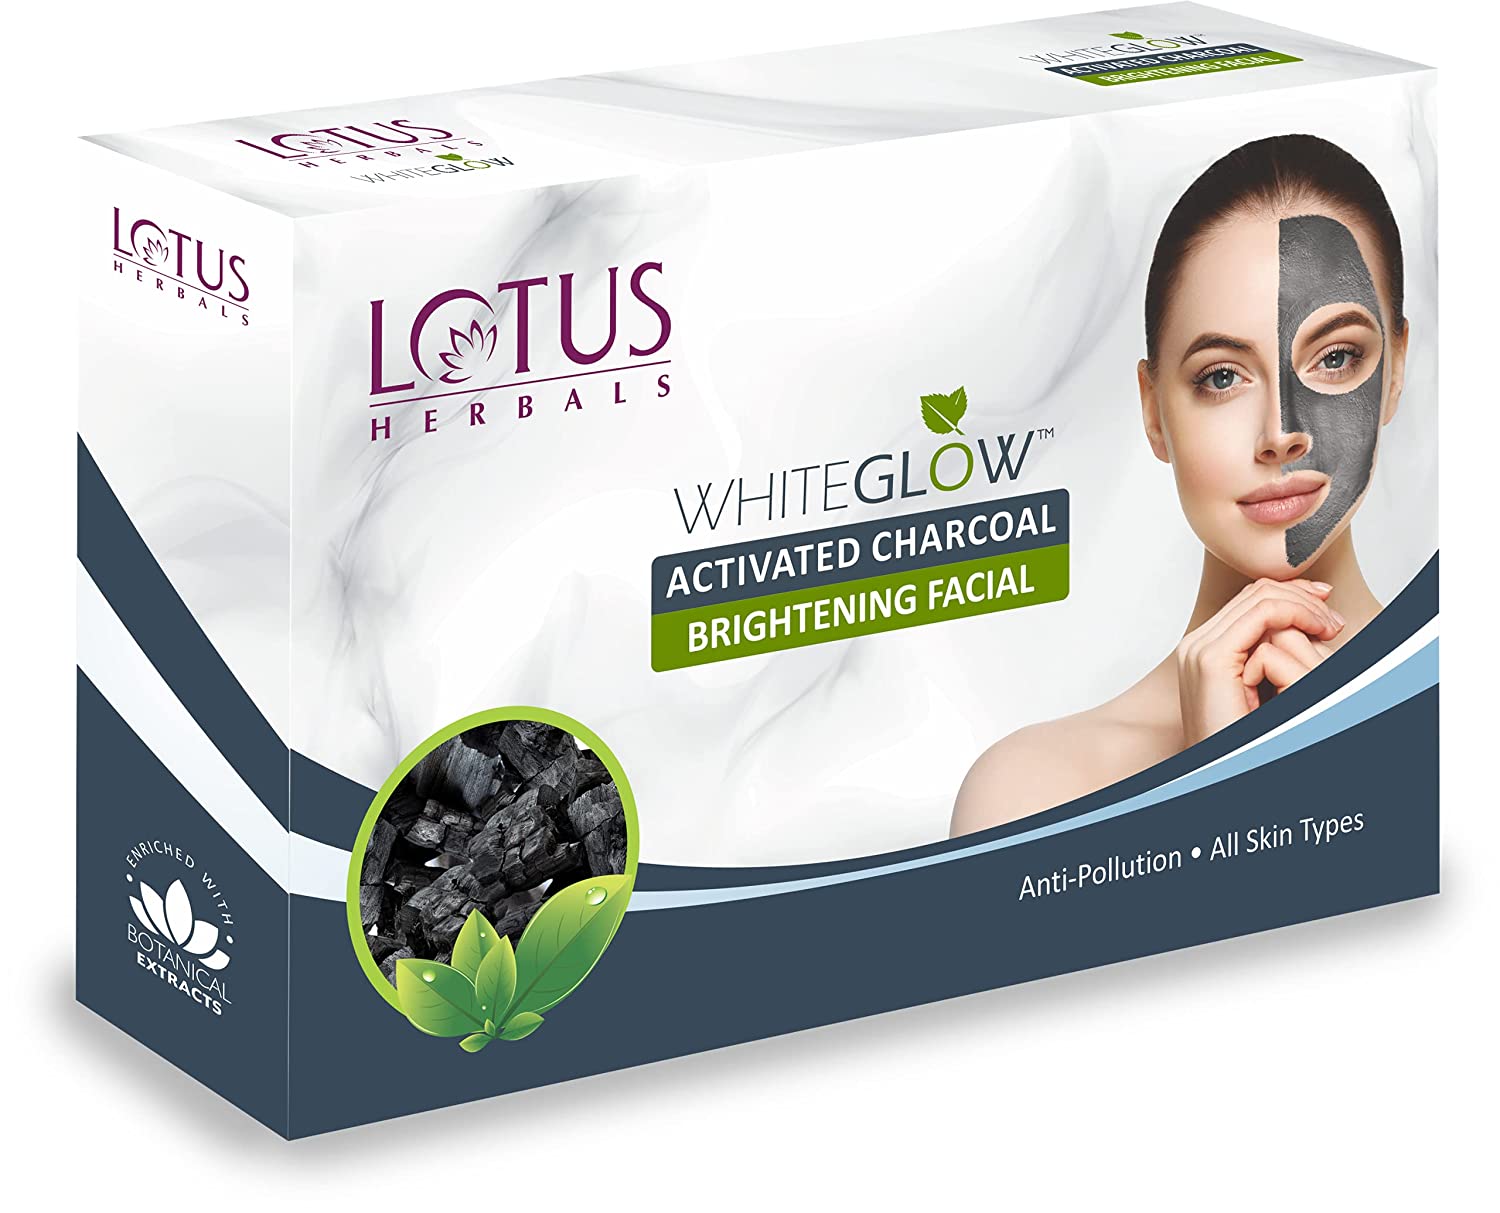 Buy Lotus Herbals WhiteGlow Activated Charcoal Brightening 4 in 1 Facial Kit